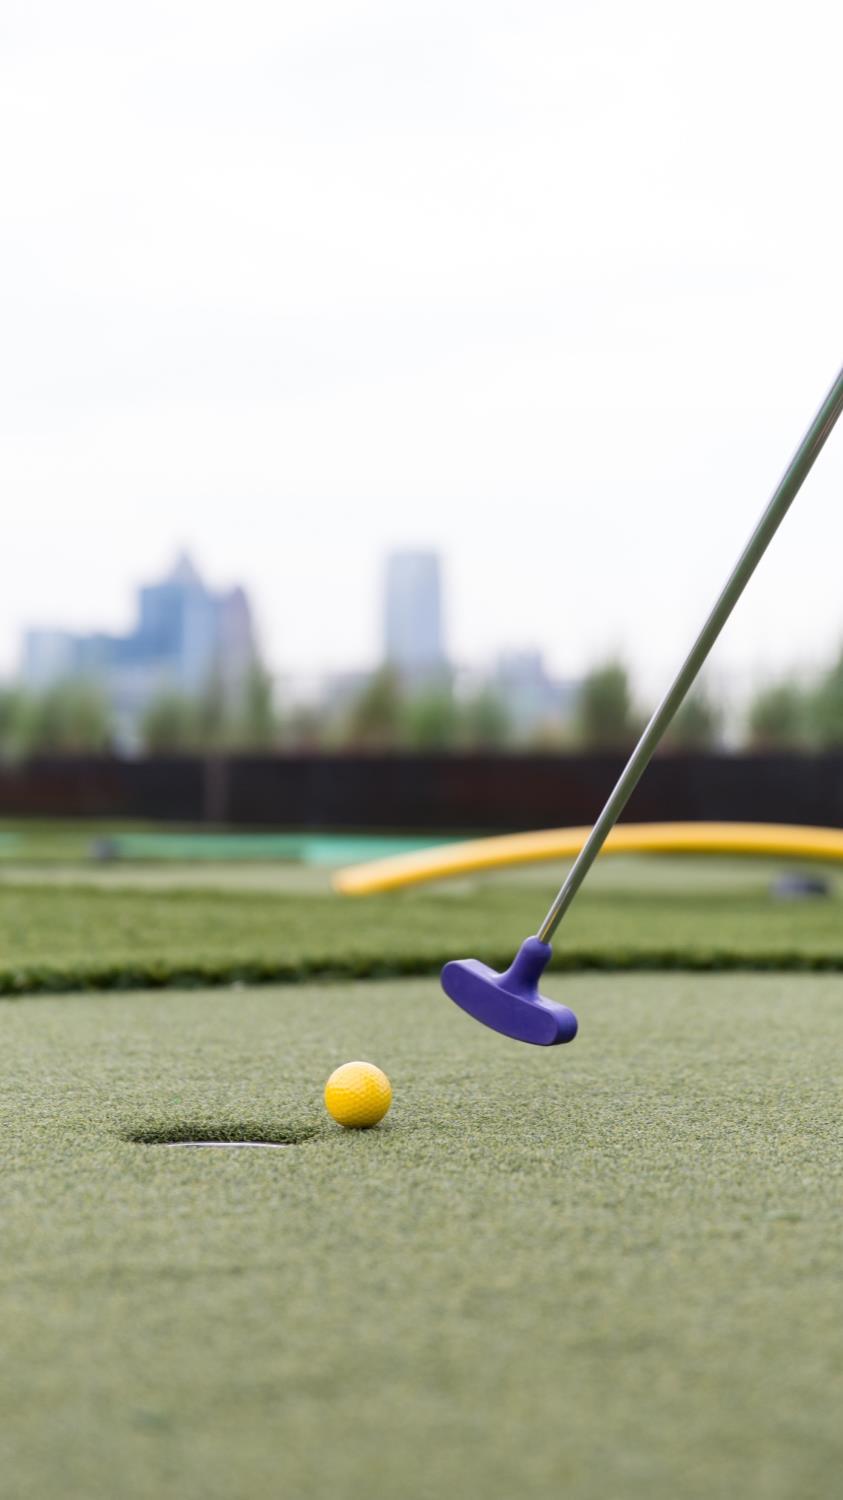 Let the Fun Begin Option A: SEMI PRIVATE / Putt Putt Only SUNDAY WEDNESDAY: $12 PER PERSON THURSDAY SATURDAY: $15 PER PERSON One round of mini golf for 25-200 people Reserved section for your group